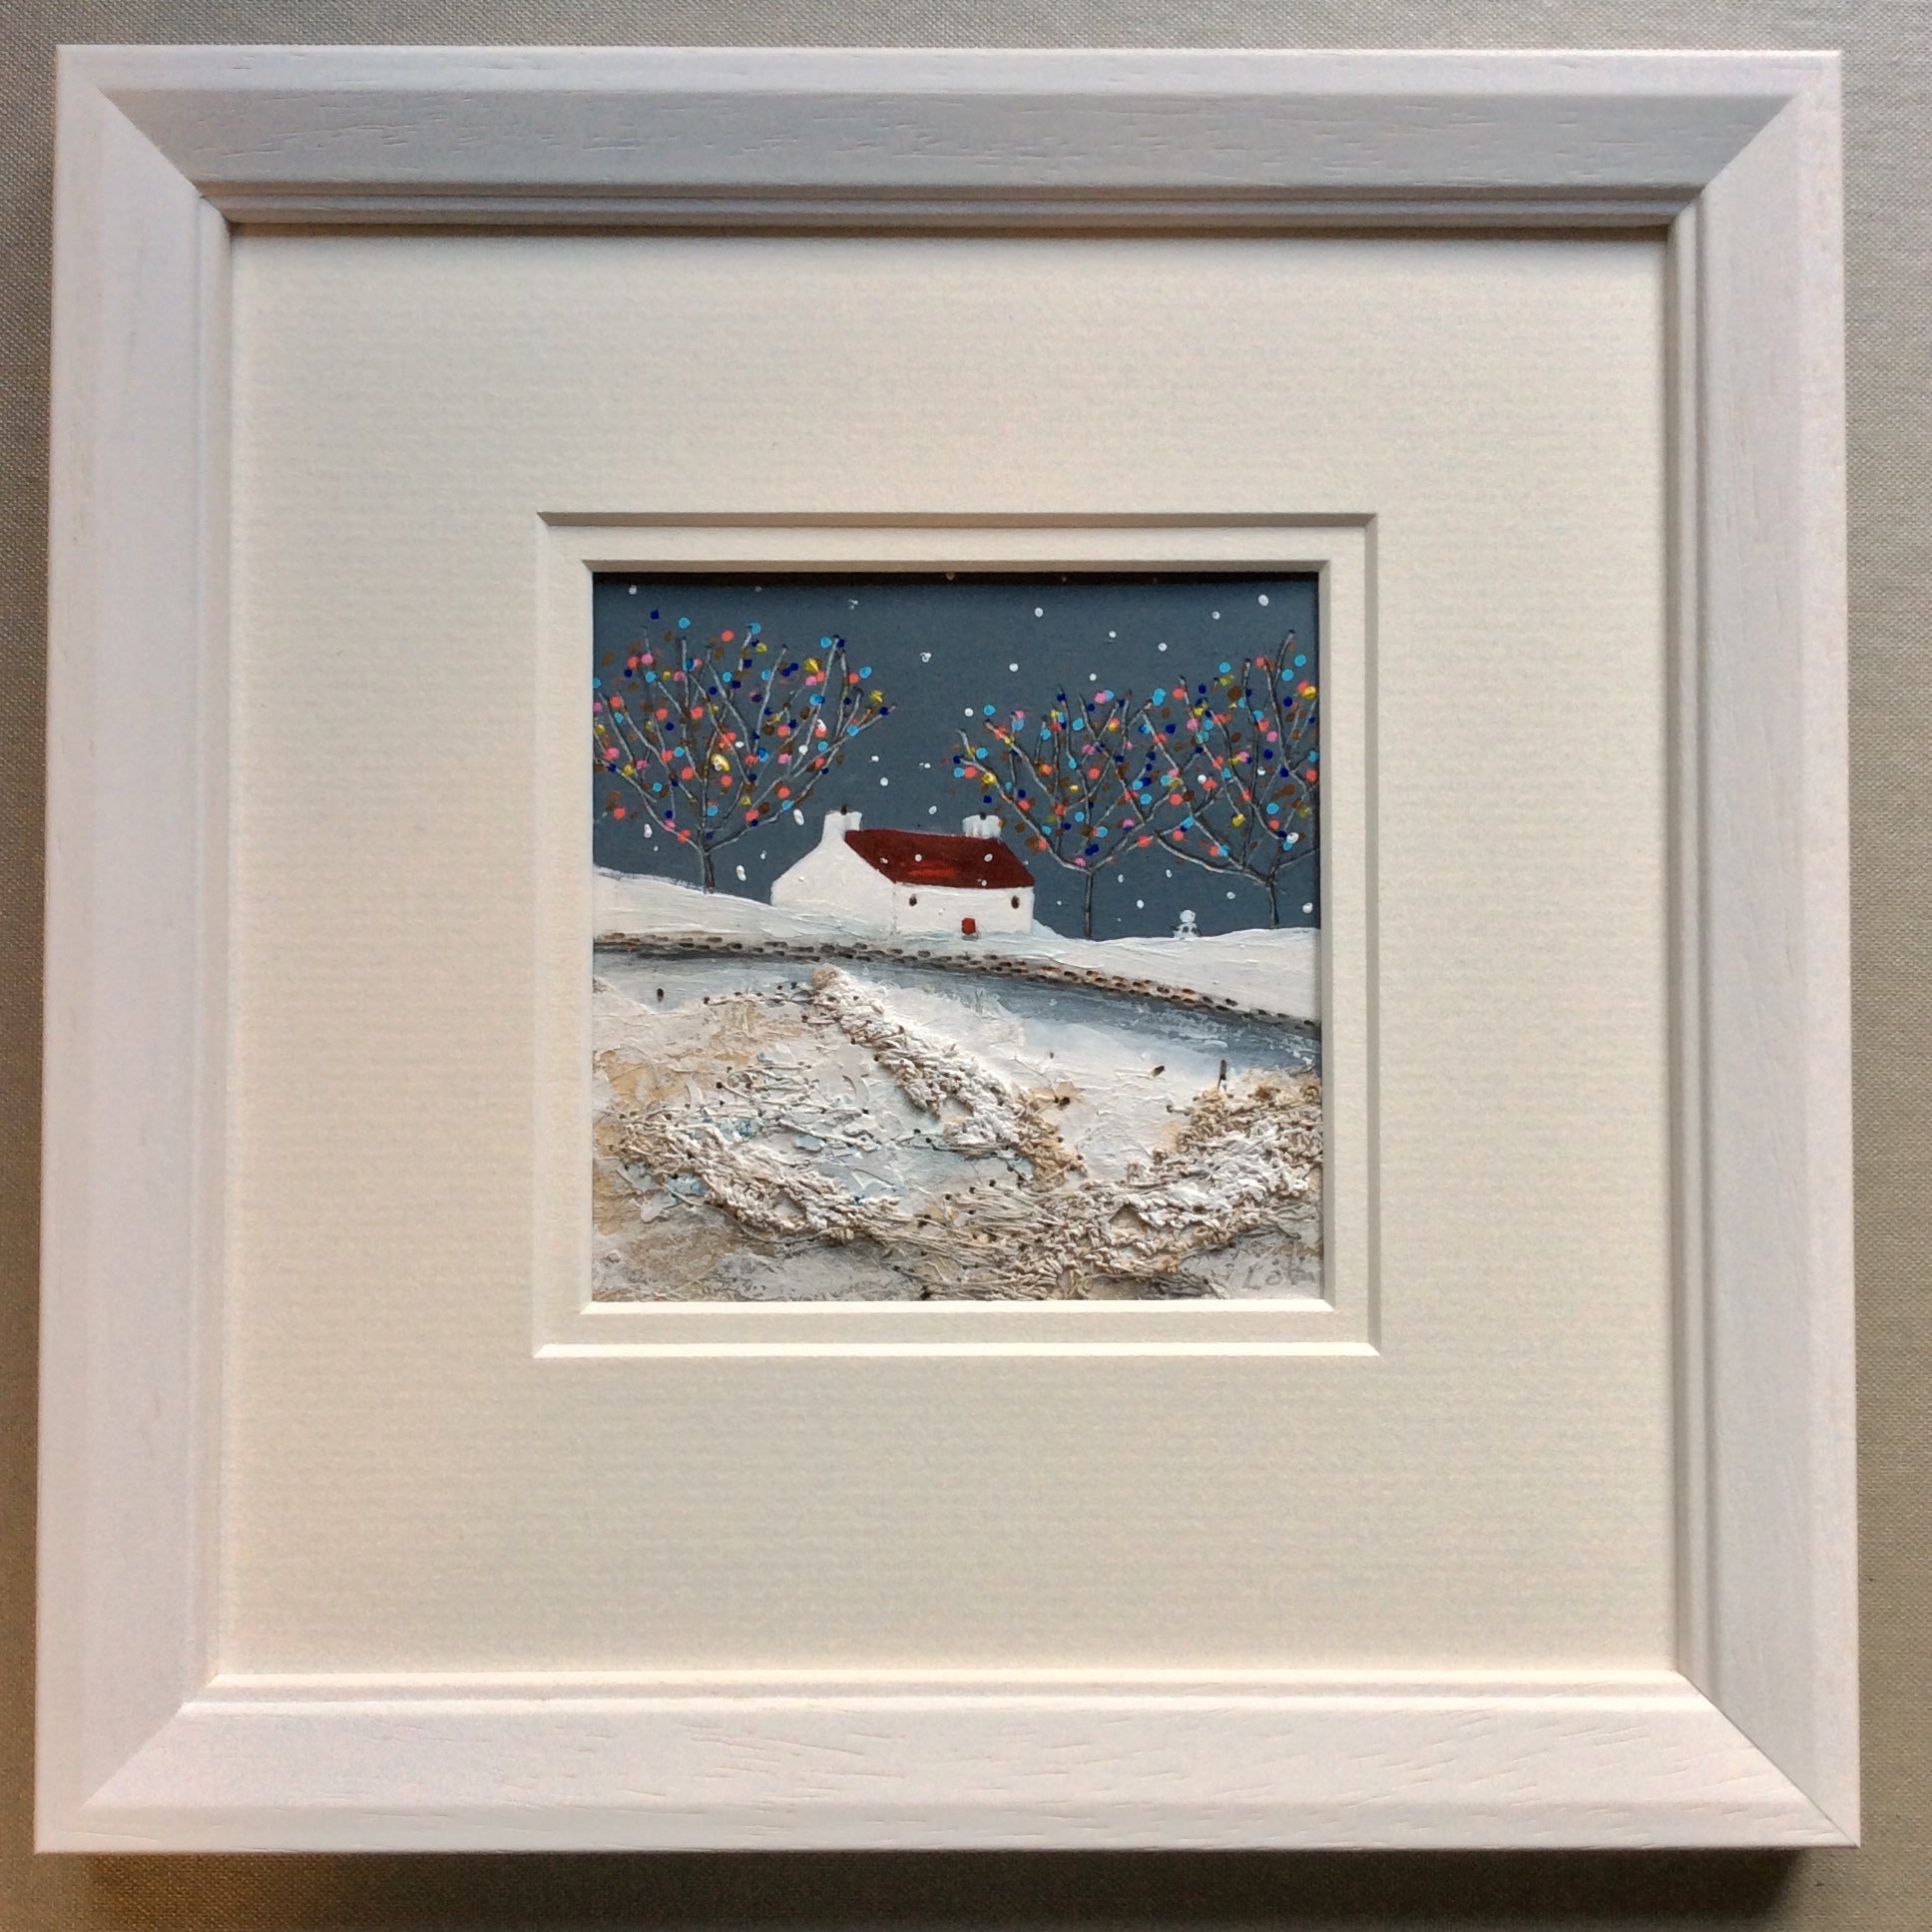 Mixed Media Art By Louise O'Hara “Christmas had arrived in the Orchard ”